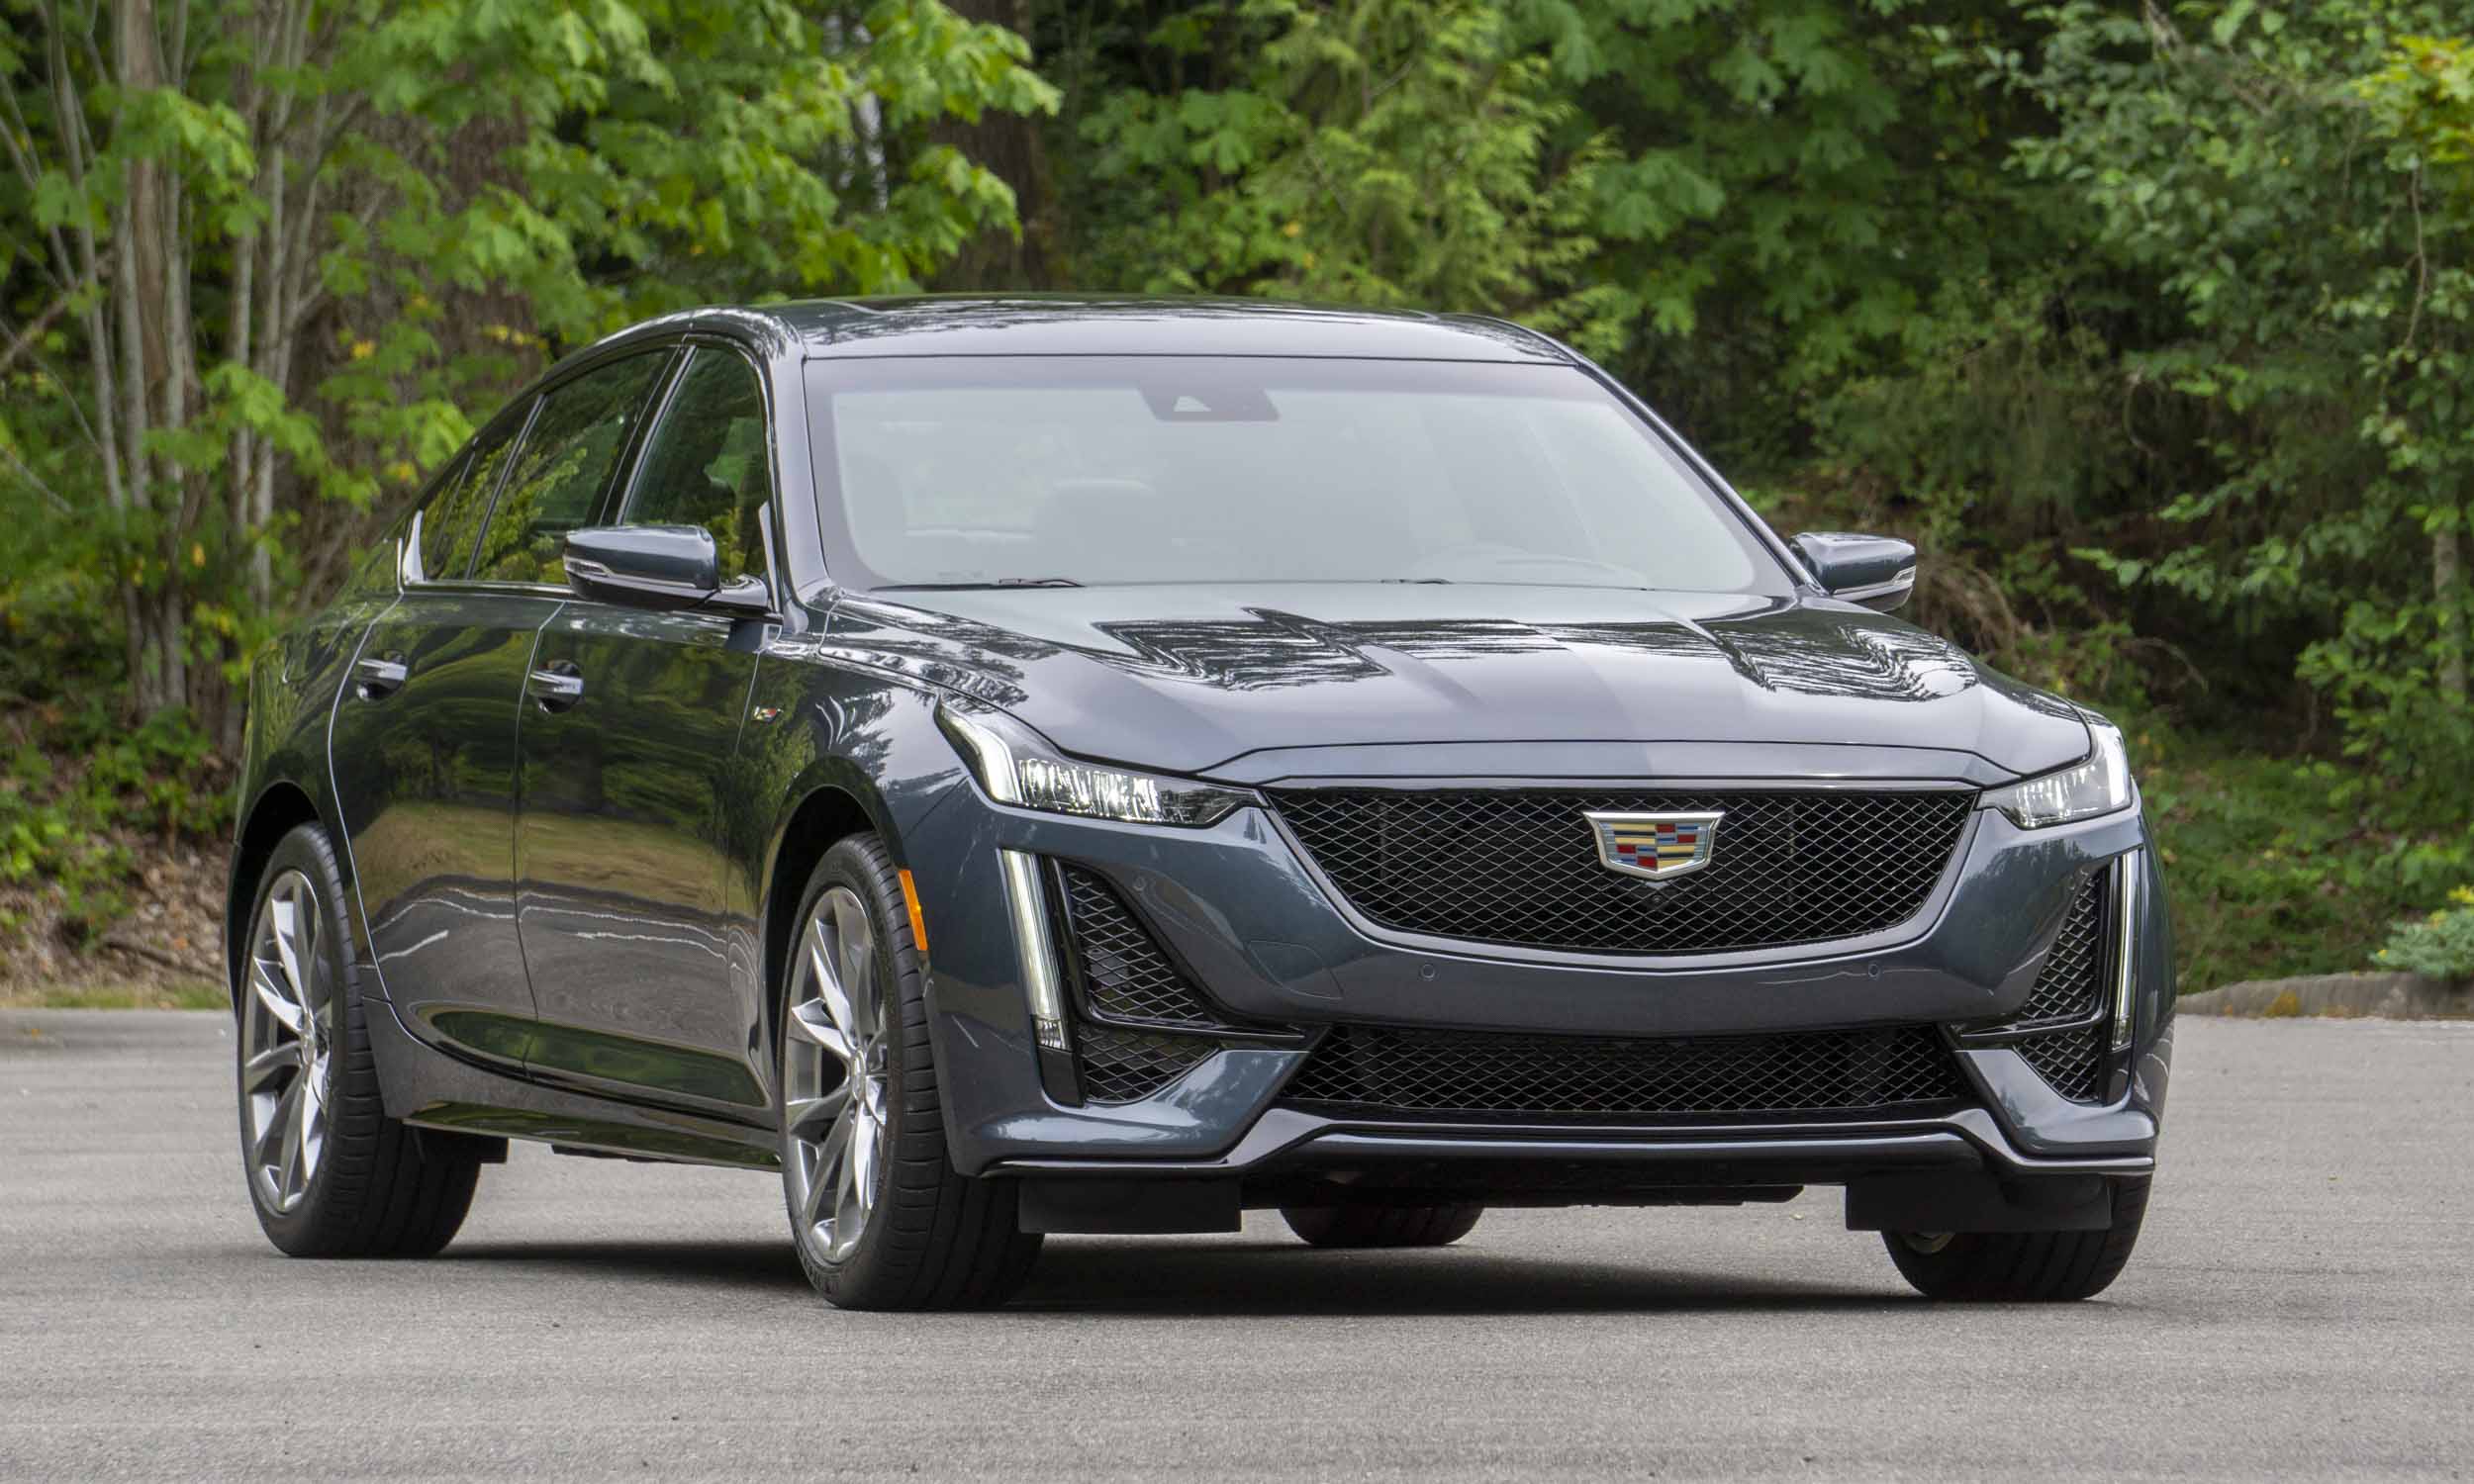 2020 Cadillac CT5 V-Series: Review | Our Auto Expert